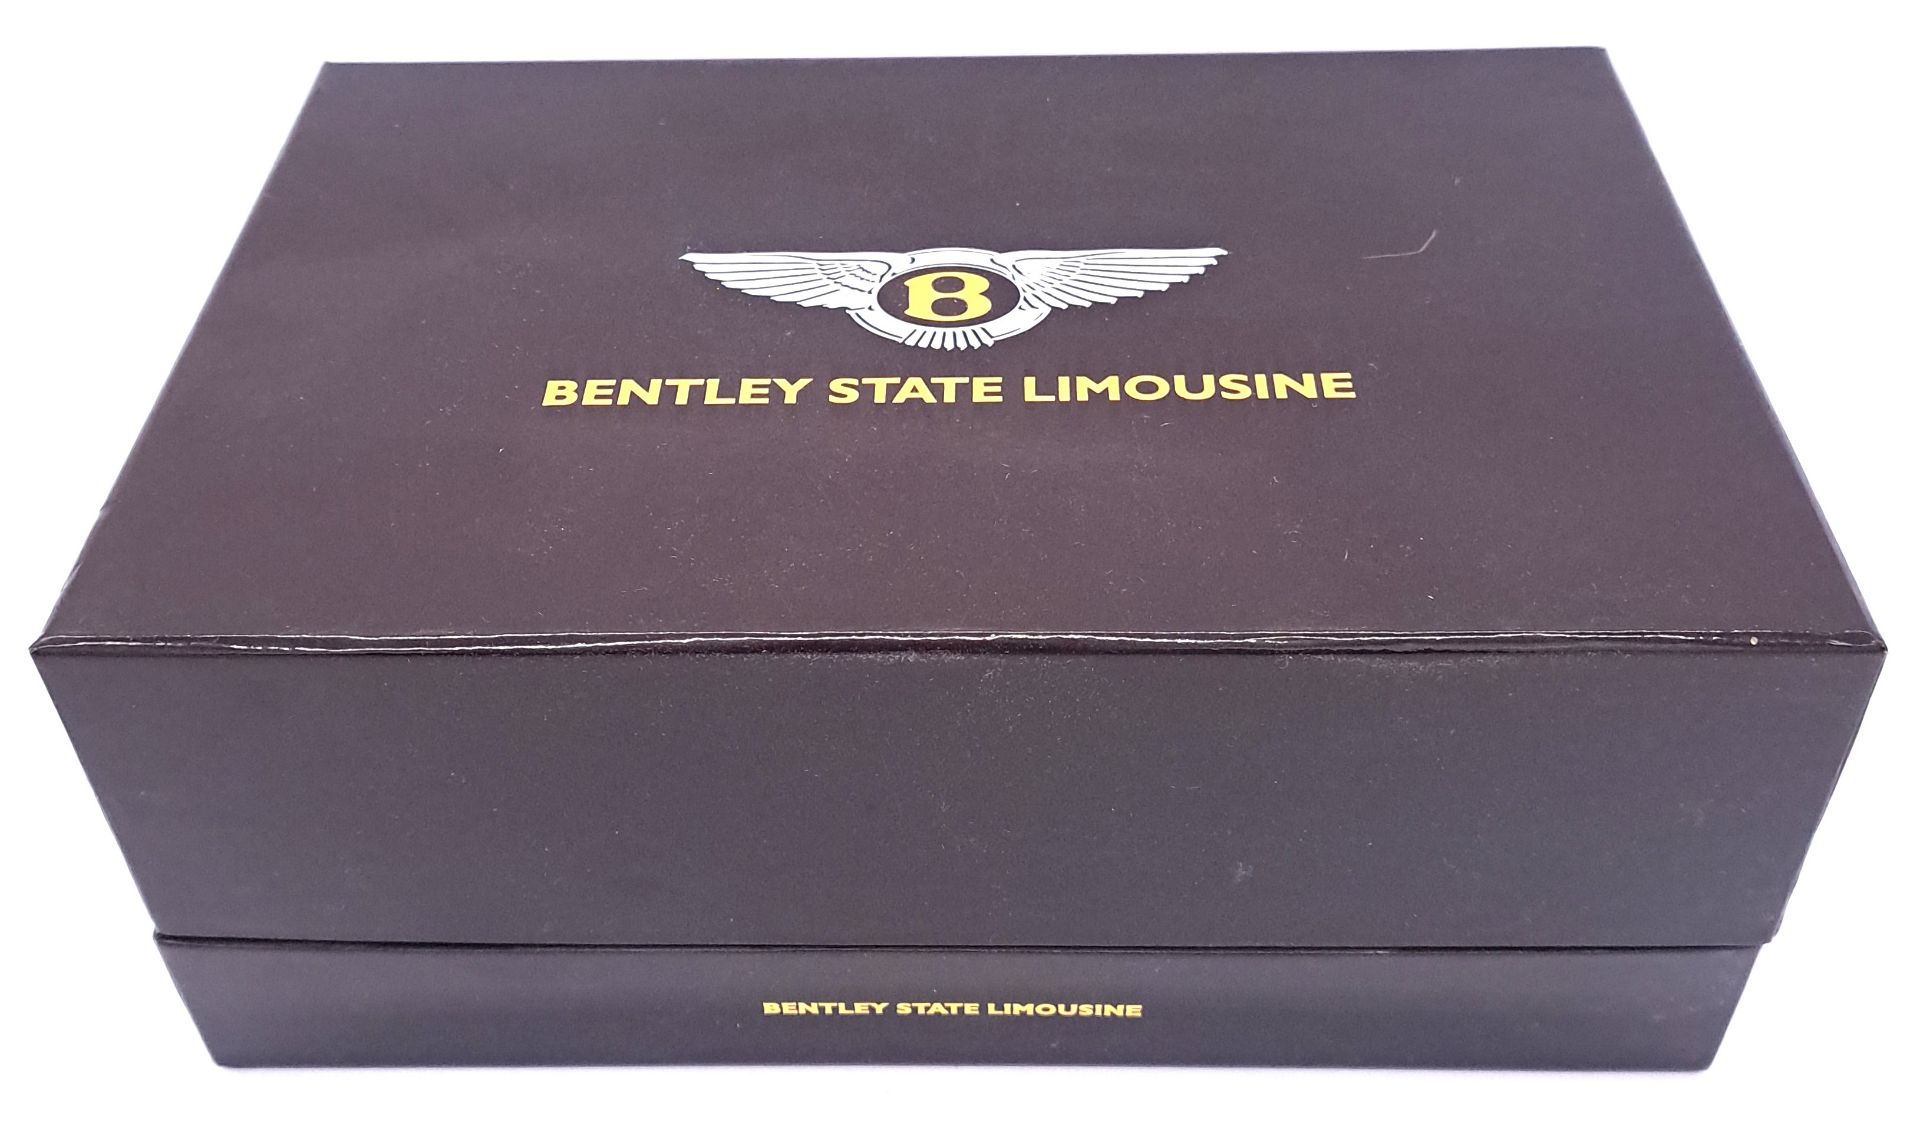 Minichamps 1/43rd scale Bentley State Limousine - Image 6 of 6